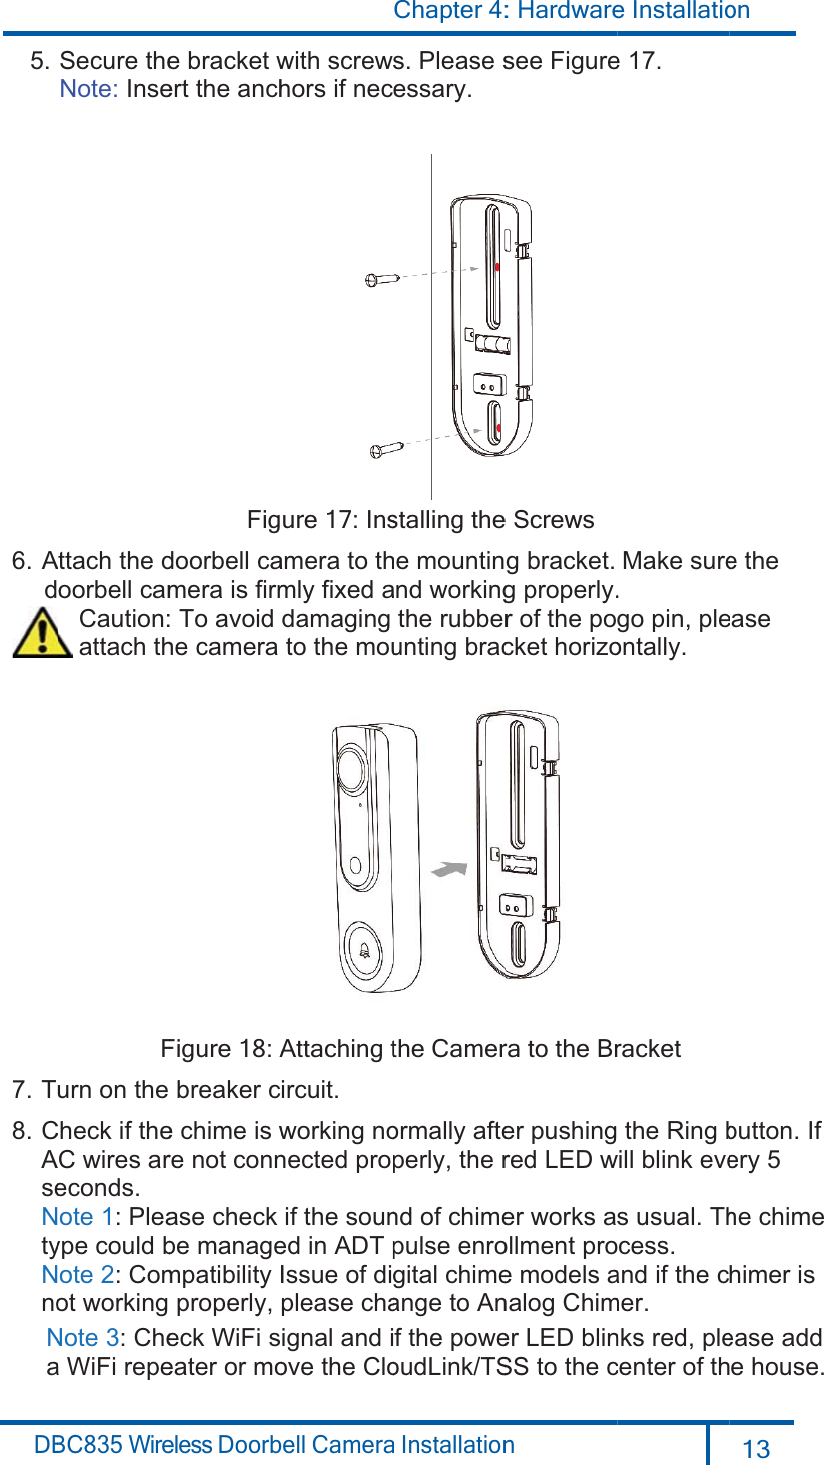 DB 5.6.  A   d7. T8.CAseNtyNnoNa BC835 WireSecure theNote: InseAttach the doorbell cam  Caution:  attach thFurn on the Check if theC wires areconds.ote 1: Pleaype could bote 2: Comot working Note 3: Chea WiFi repeeless Doorbe bracket wert the anchFigdoorbell camera is firm To avoid he camera Figure 18: Abreaker ce chime is wre not connase check be managempatibilityIproperly,eck WiFi seater or moell Camerawith screwshors if necure 17: Insamera to thmly fixed adamagingto the mouAttaching tircuit.working nonected propif the souned in ADT pIssue of digplease chaignal and iove the CloChapter 4:a Installations. Please sessary.stalling the he mountinand workingthe rubberunting bracthe Camerormally afteperly, the rnd of chimepulse enrogital chimeange to Anf the poweoudLink/TS: Hardwaren see Figuree Screws  g bracket.g properly.r of the pocket horizora to the Brer pushingred LED wer works asollment proe models analog Chimer LED blinSS to the ce Installatioe 17. Make sure.go pin, pleontally.racket   the Ring bwill blink eves usual. Thcess. and if the cmer.nks red, plecenter of thon 13  e the   easebutton. If ery 5he chime himer is ease add e house.